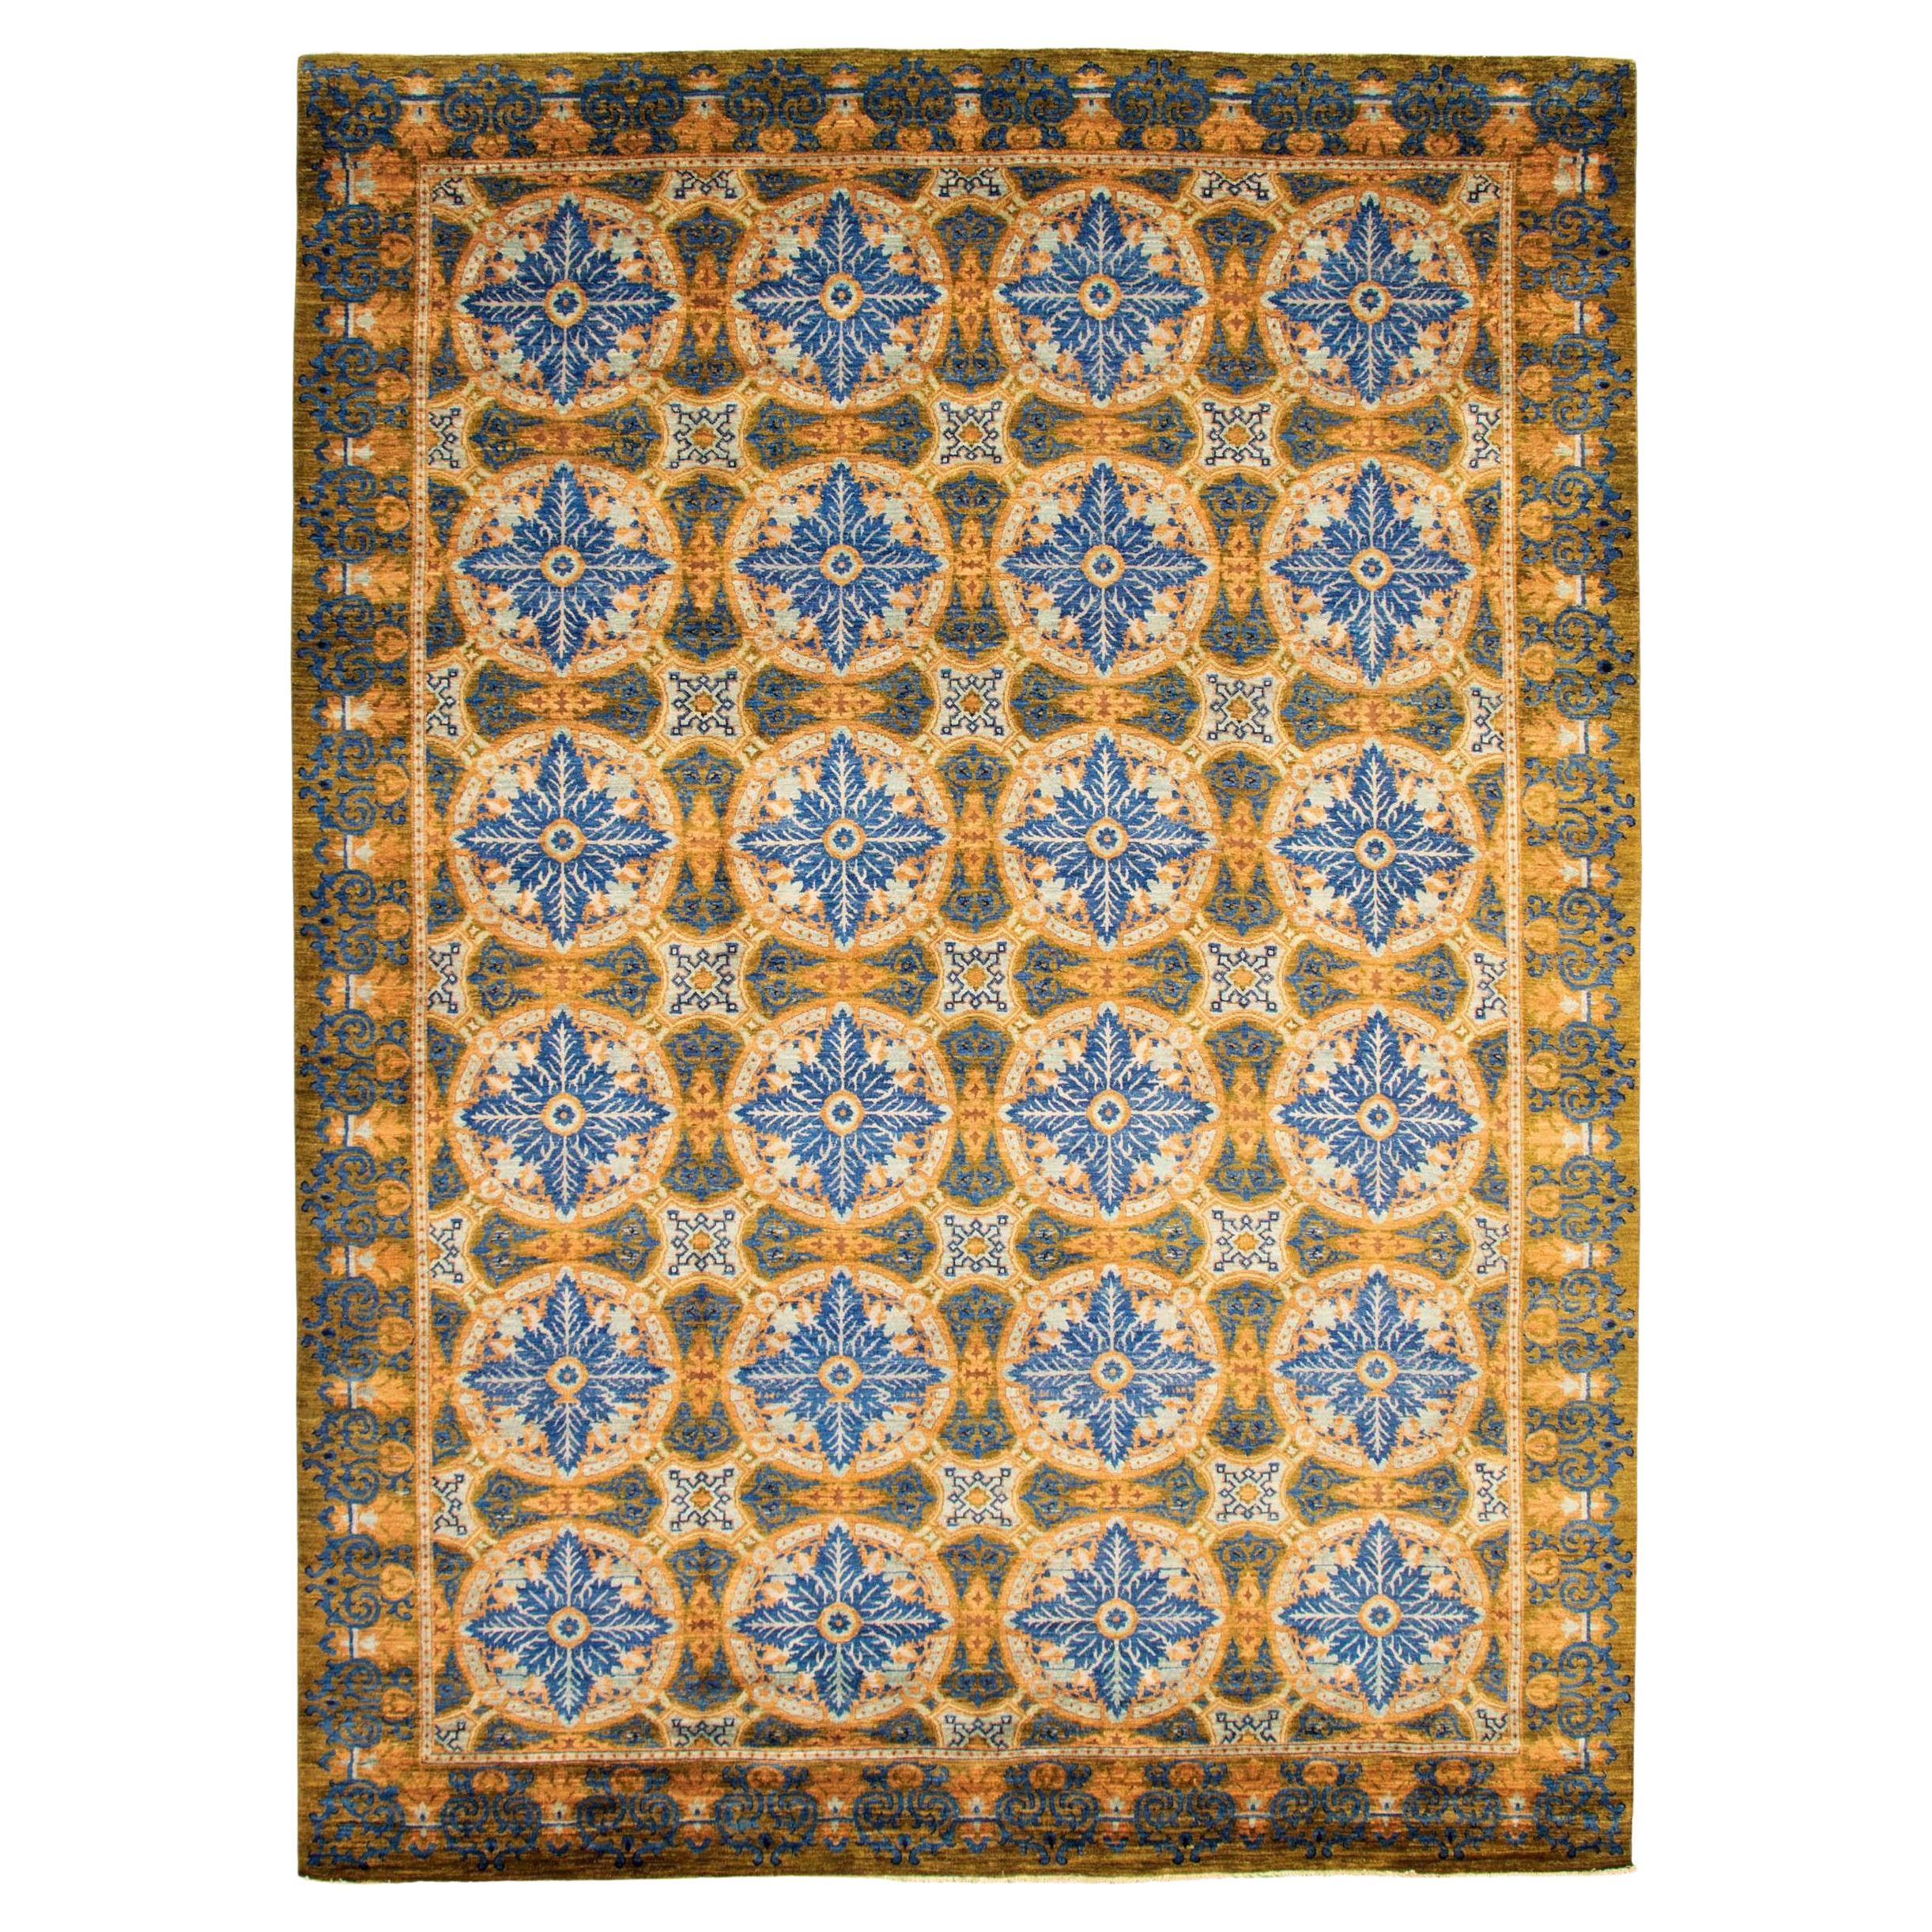 Geometric and Transitional Garden Carpet, Indigo, and Gold, Wool, 9' x 12' For Sale